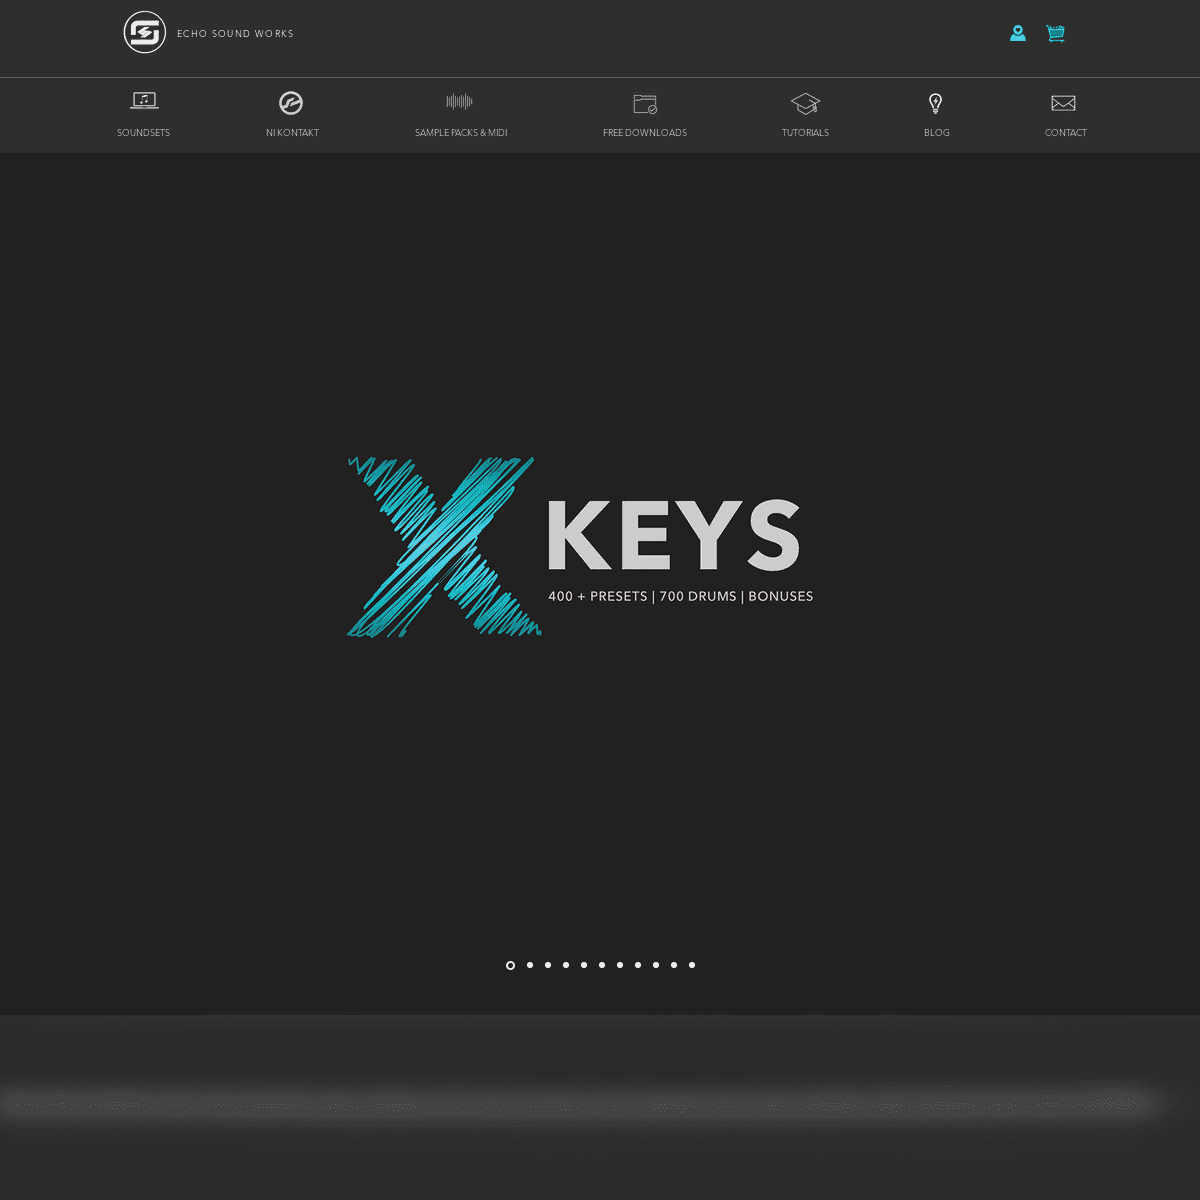 The #1 site for Serum presets, Samplepacks, & more. Find your sound!